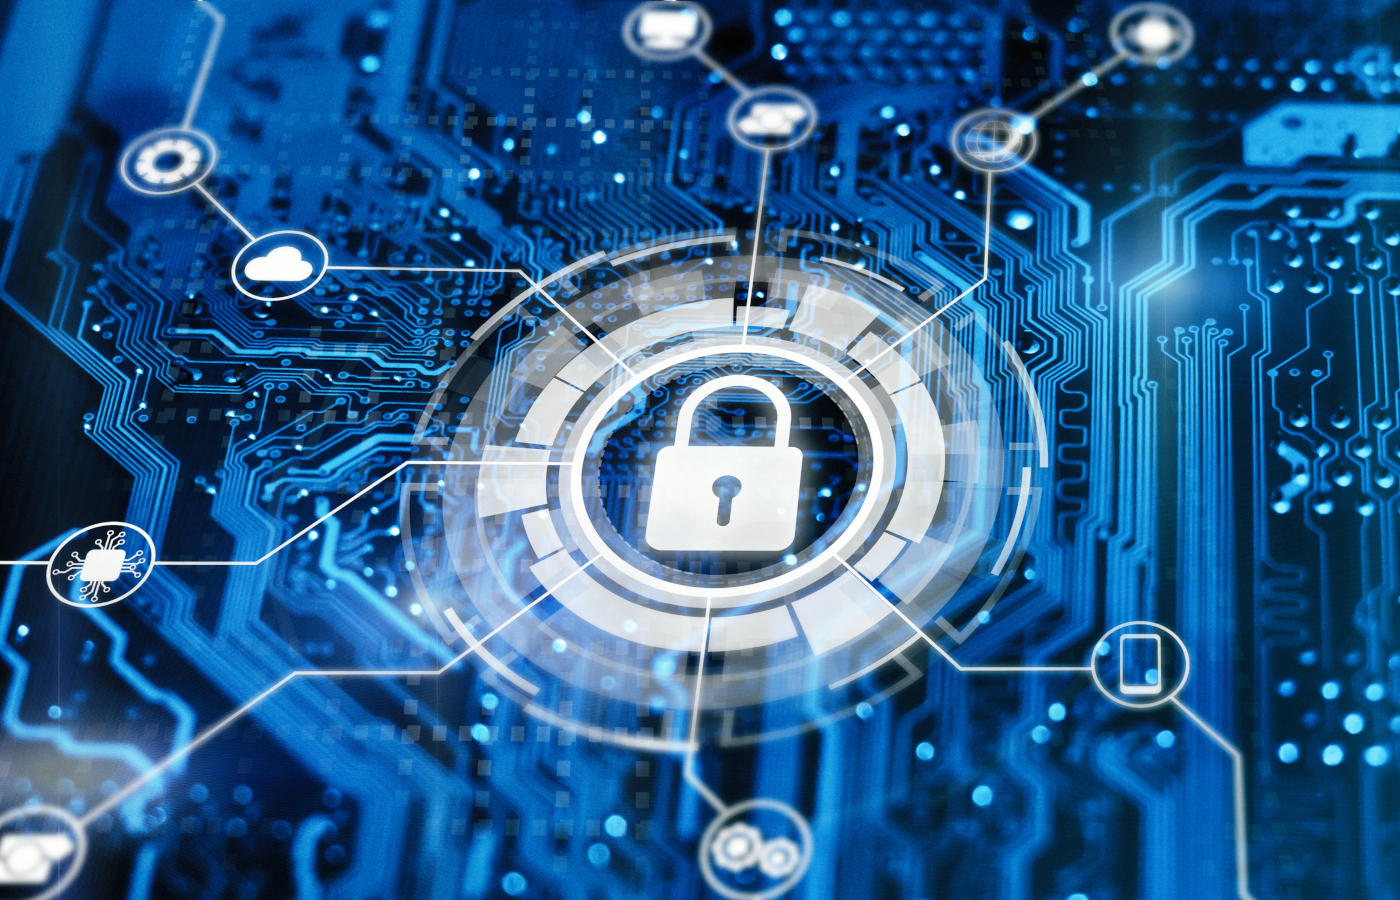 Securing the IoT edge requires a holistic, adaptable security framework